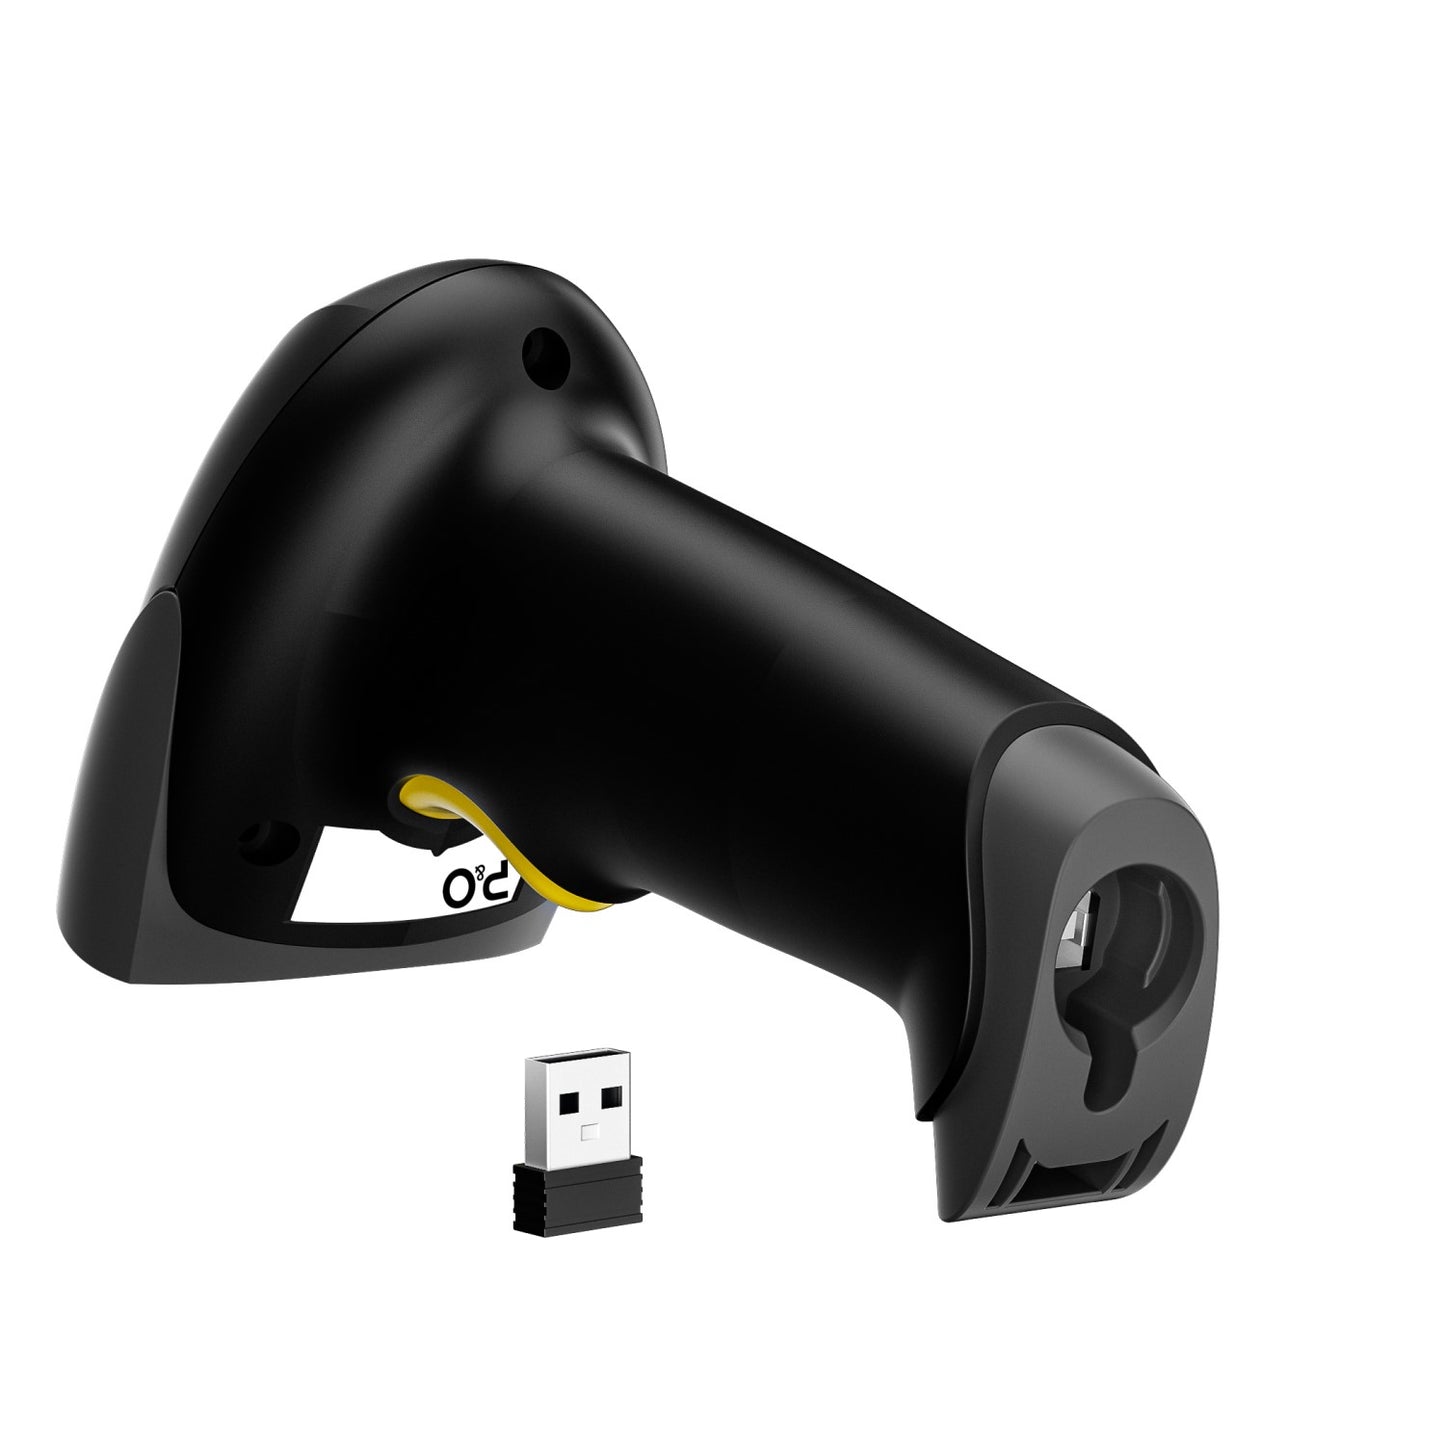 Imager 2D barcode scanner, wireless with USB dongle BS144